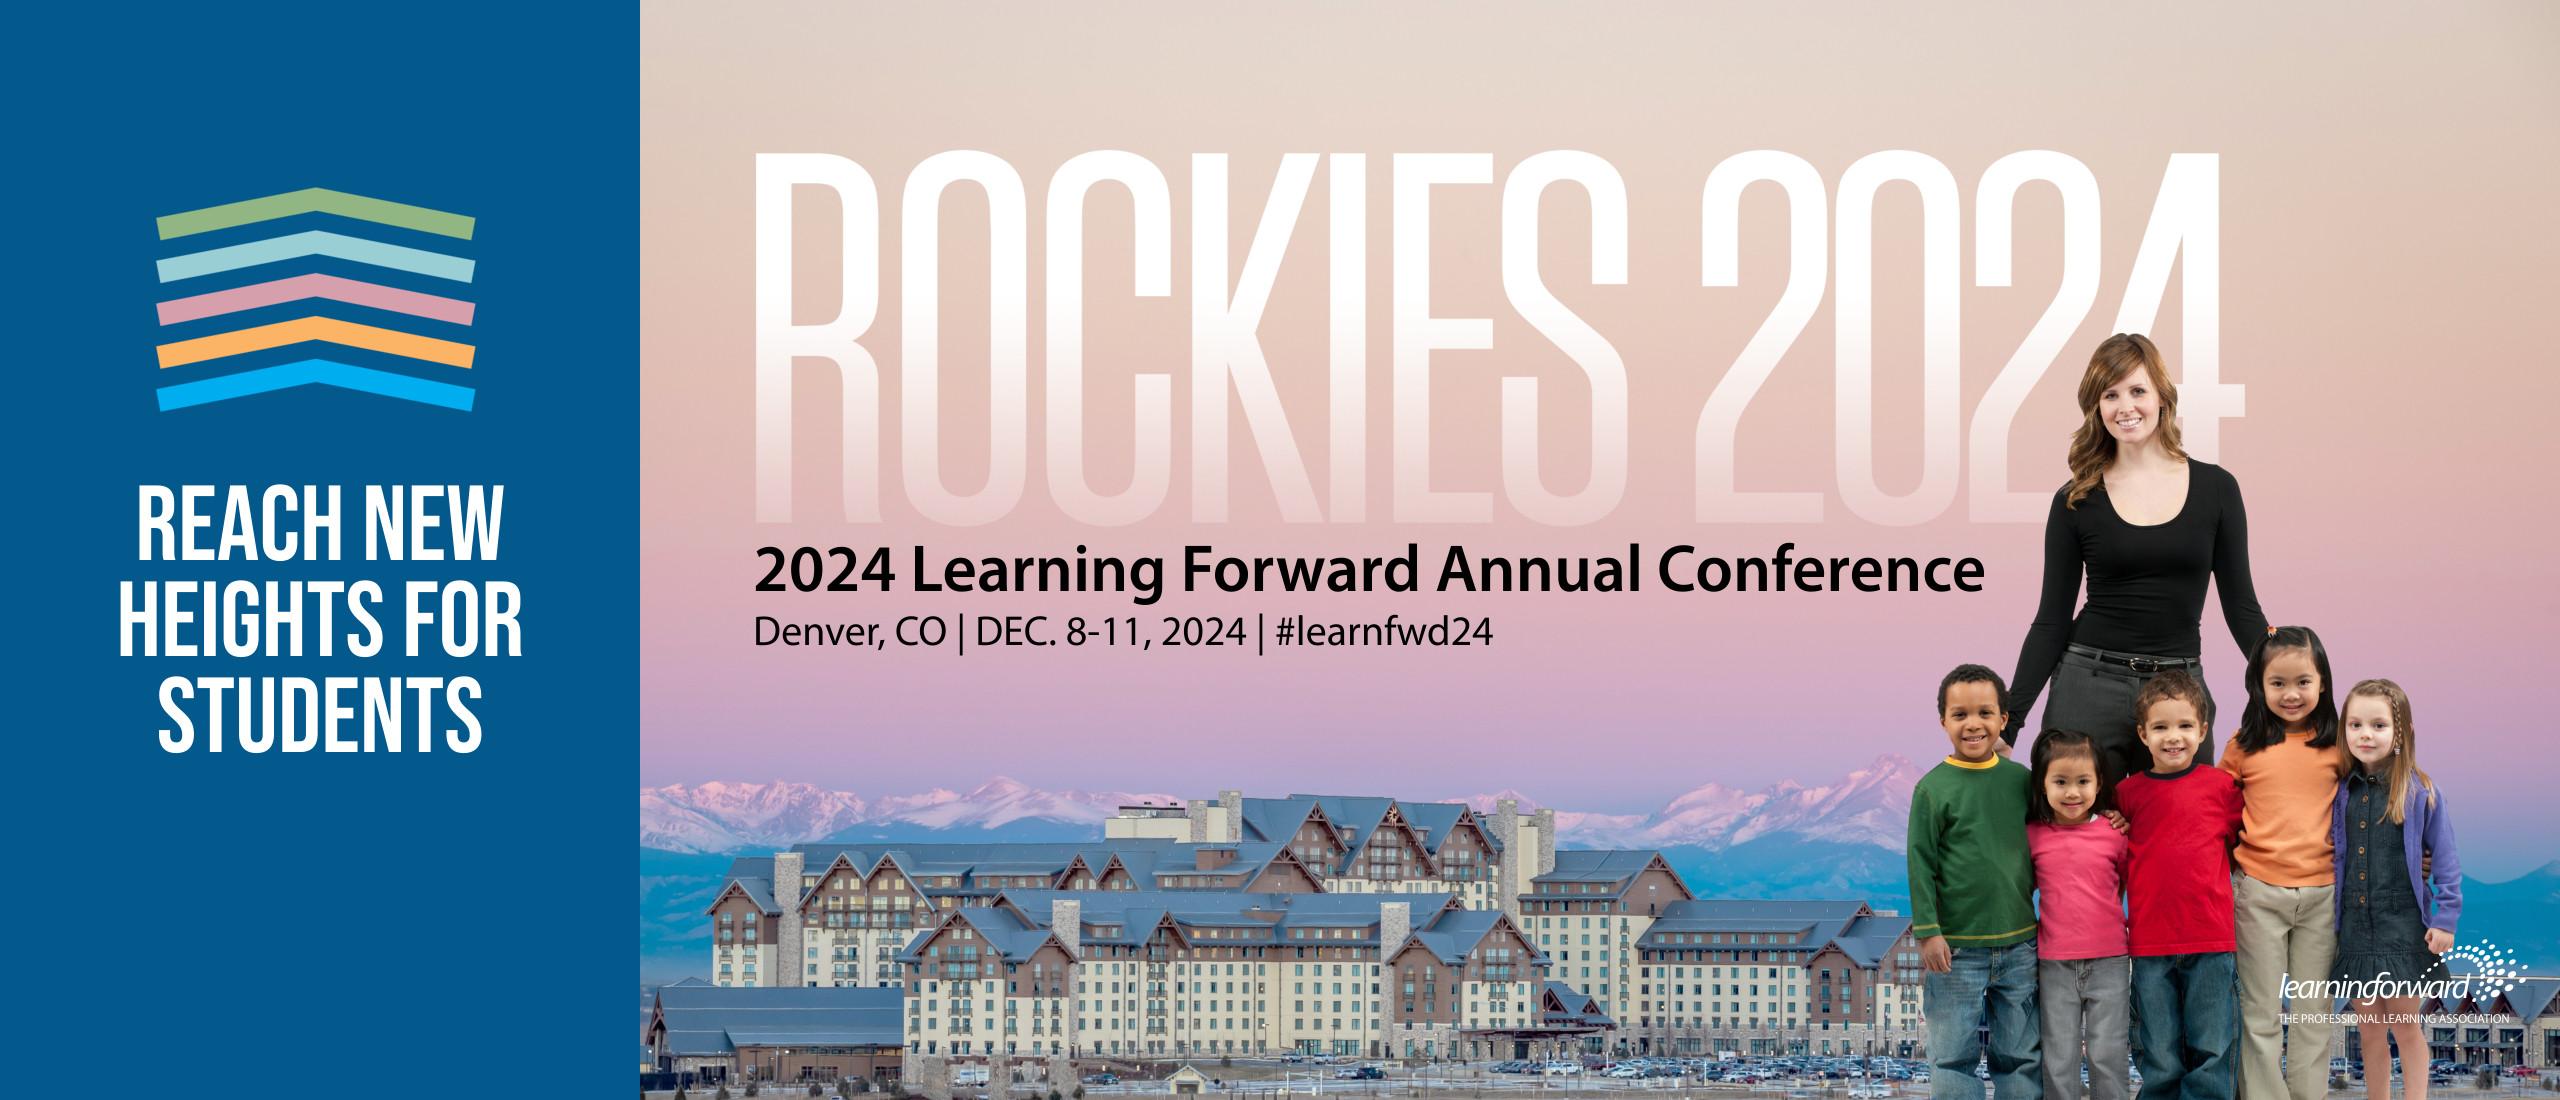 Reach New Heights for Students, Rockies 2024 - Learning Forward's 2024 Annual Conference Dec. 8-11, 2024 | Denver, CO | #learnfwd24